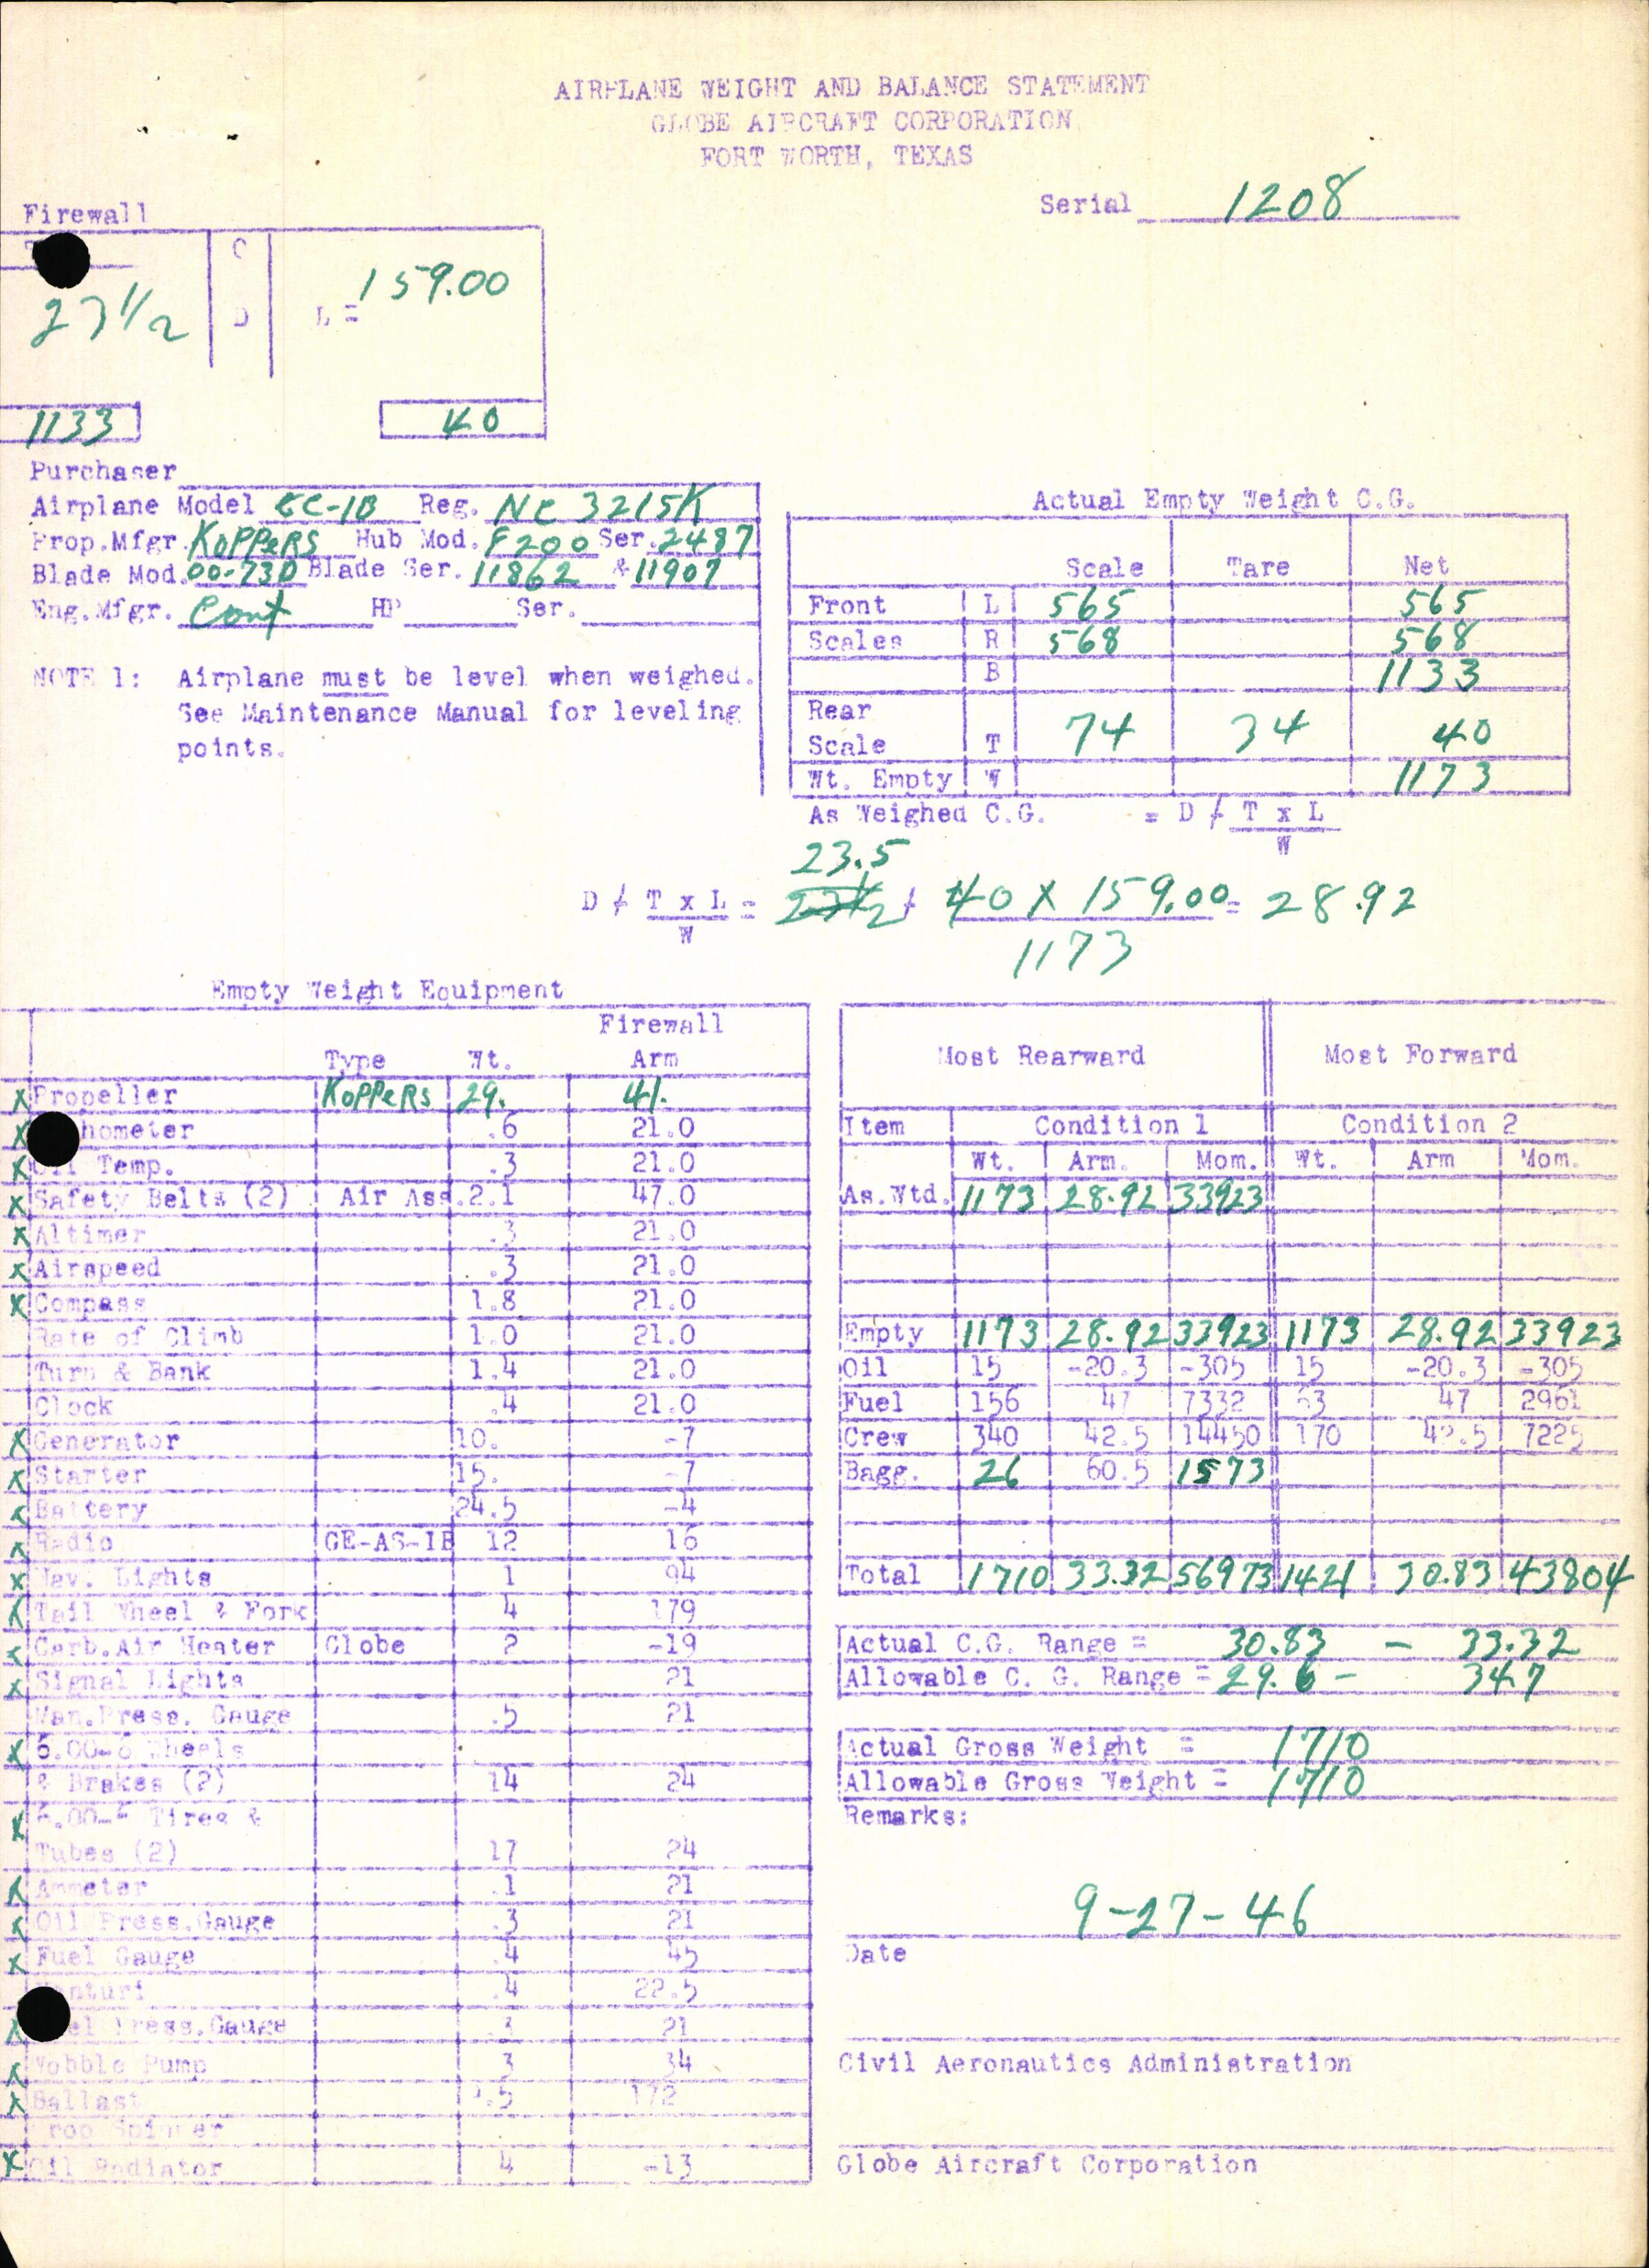 Sample page 7 from AirCorps Library document: Technical Information for Serial Number 1208